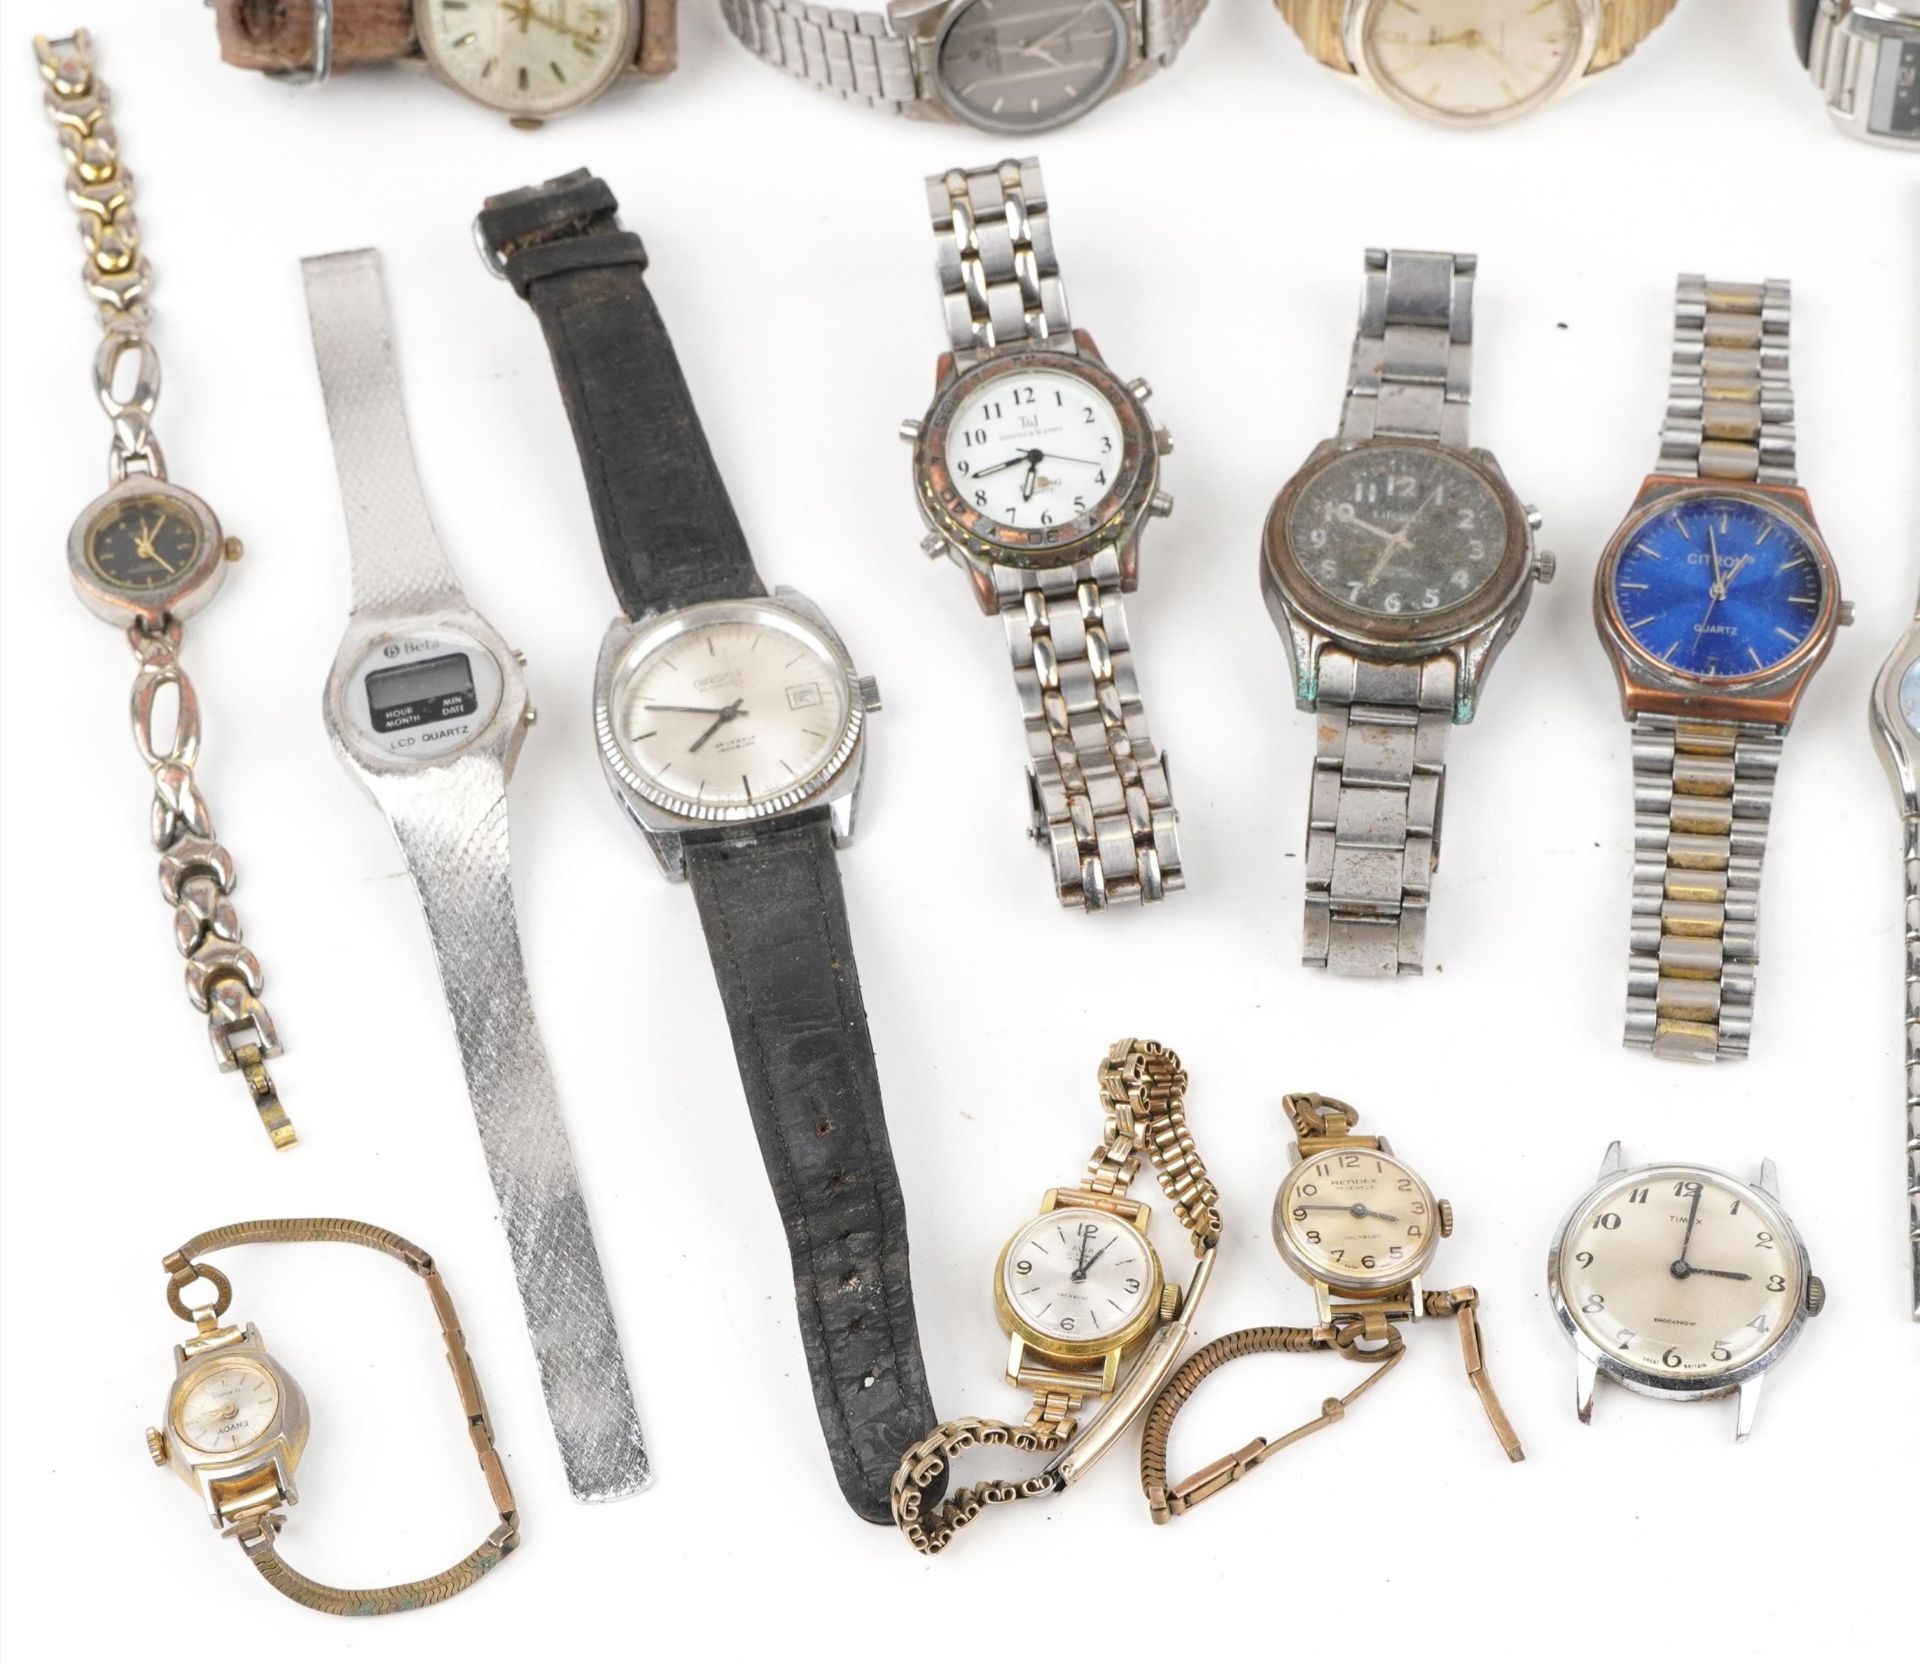 Vintage and later ladies and gentlemen's wristwatches including Smiths, Timex and Citizen - Image 4 of 5